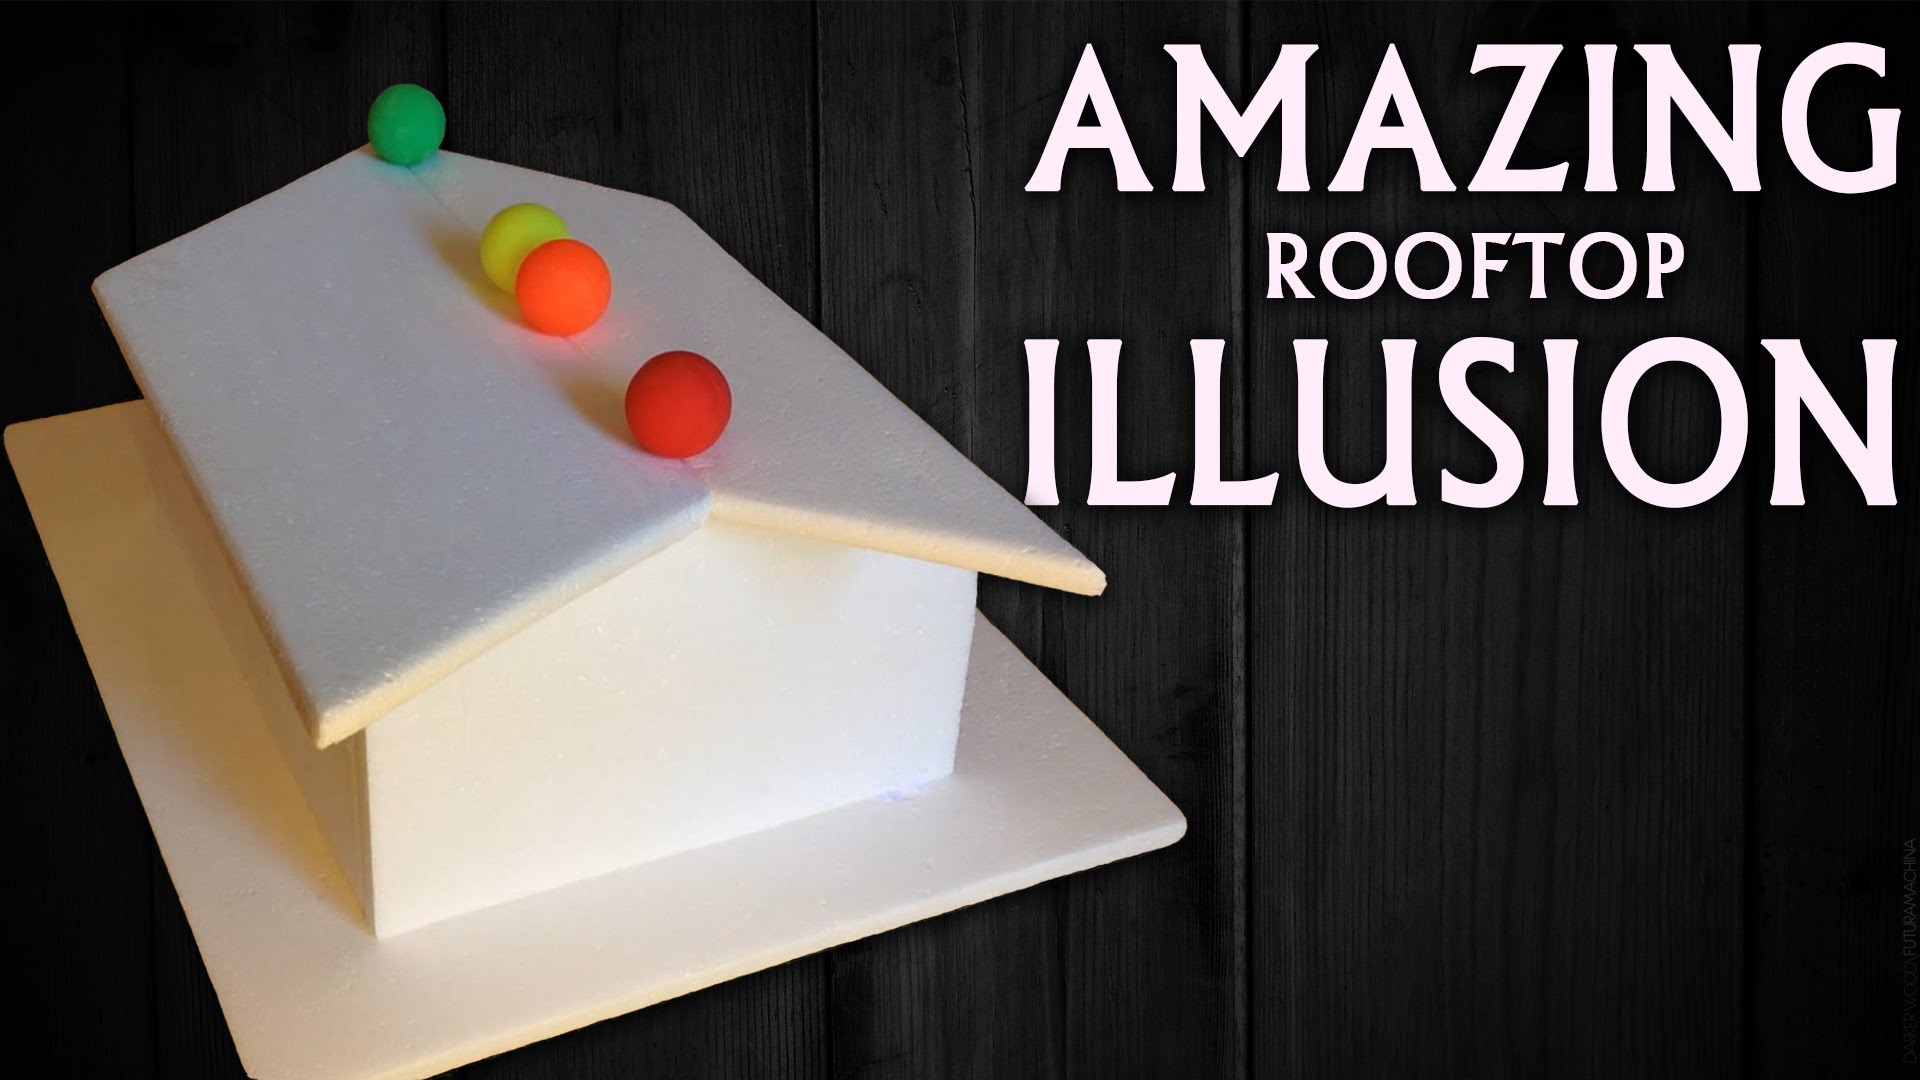 Rooftop illusion | Home Science